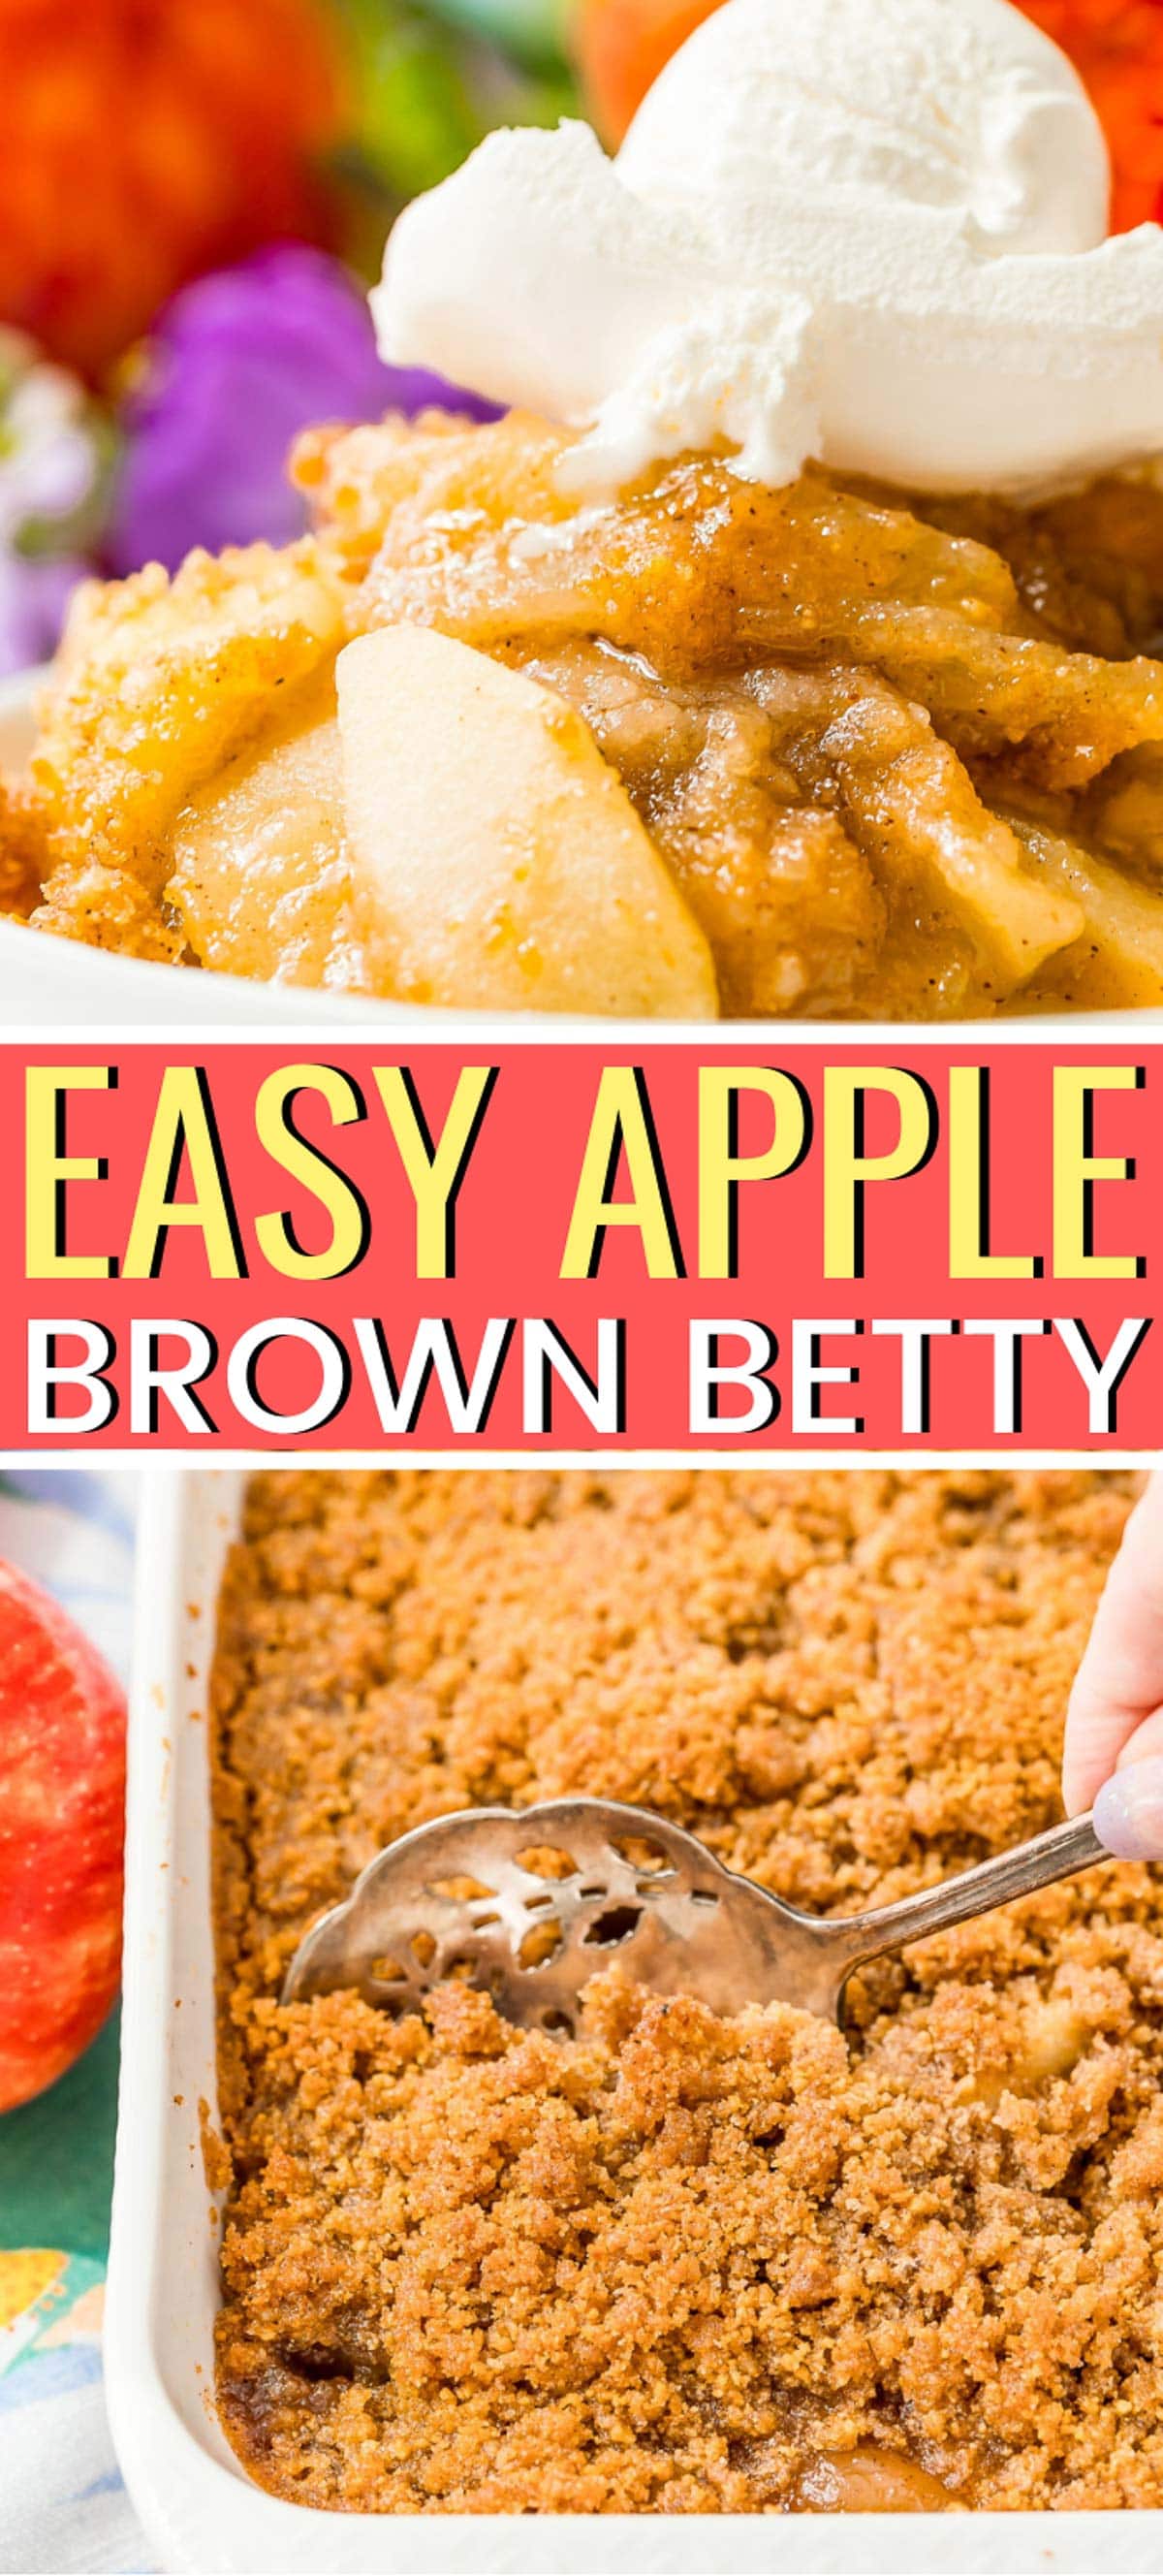 Apple Brown Betty is a classic baked apple recipe that's super easy to make. It's loaded with spices and topped with a sugary crust people can't get enough of! via @sugarandsoulco